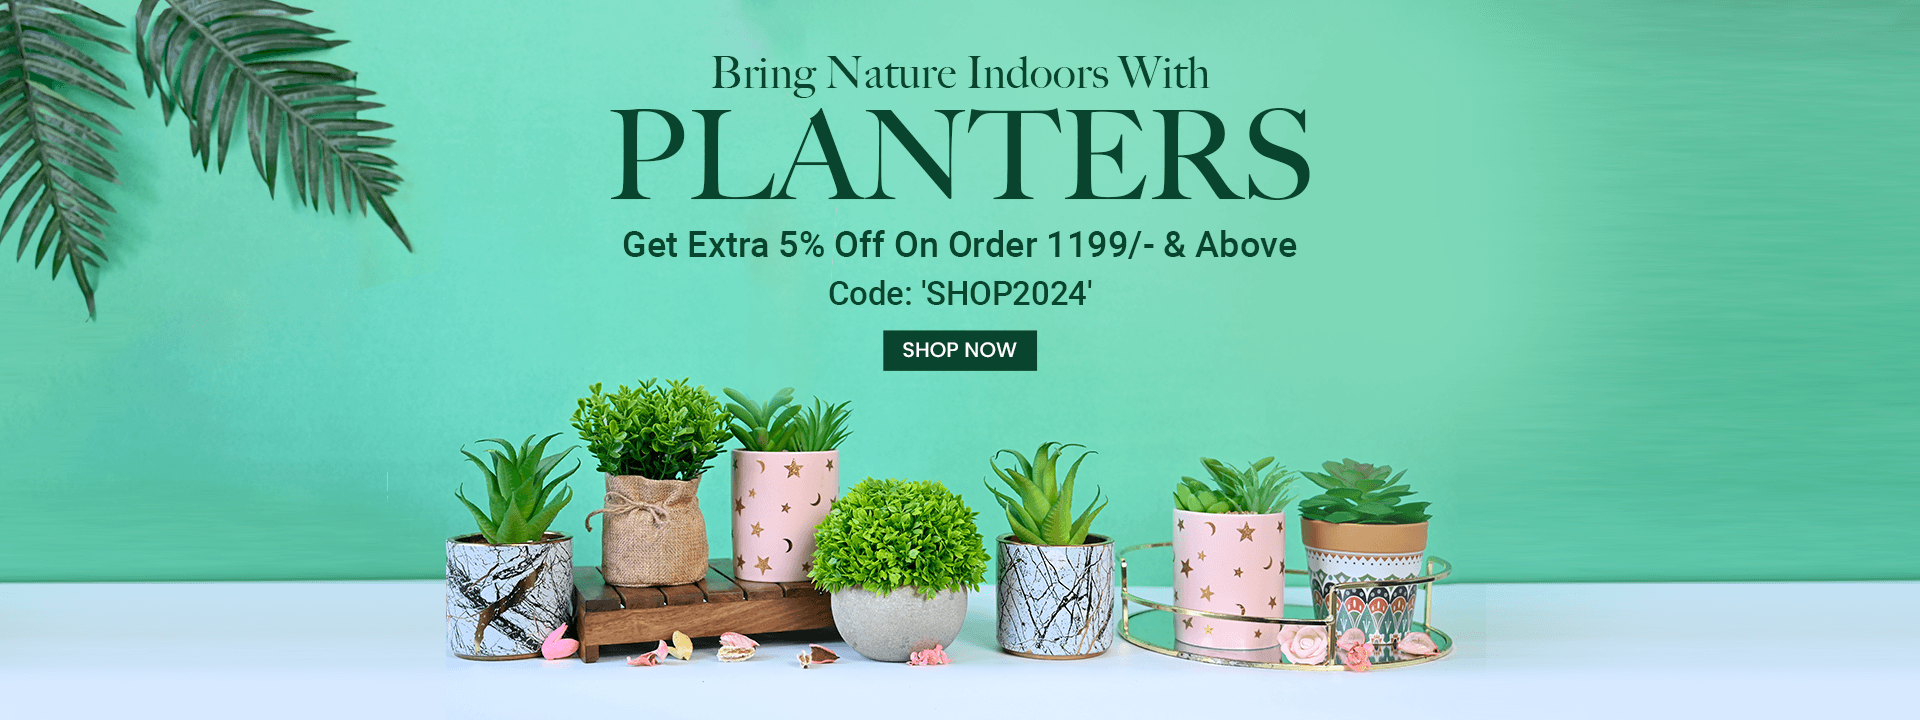 Planters_banner_web.png